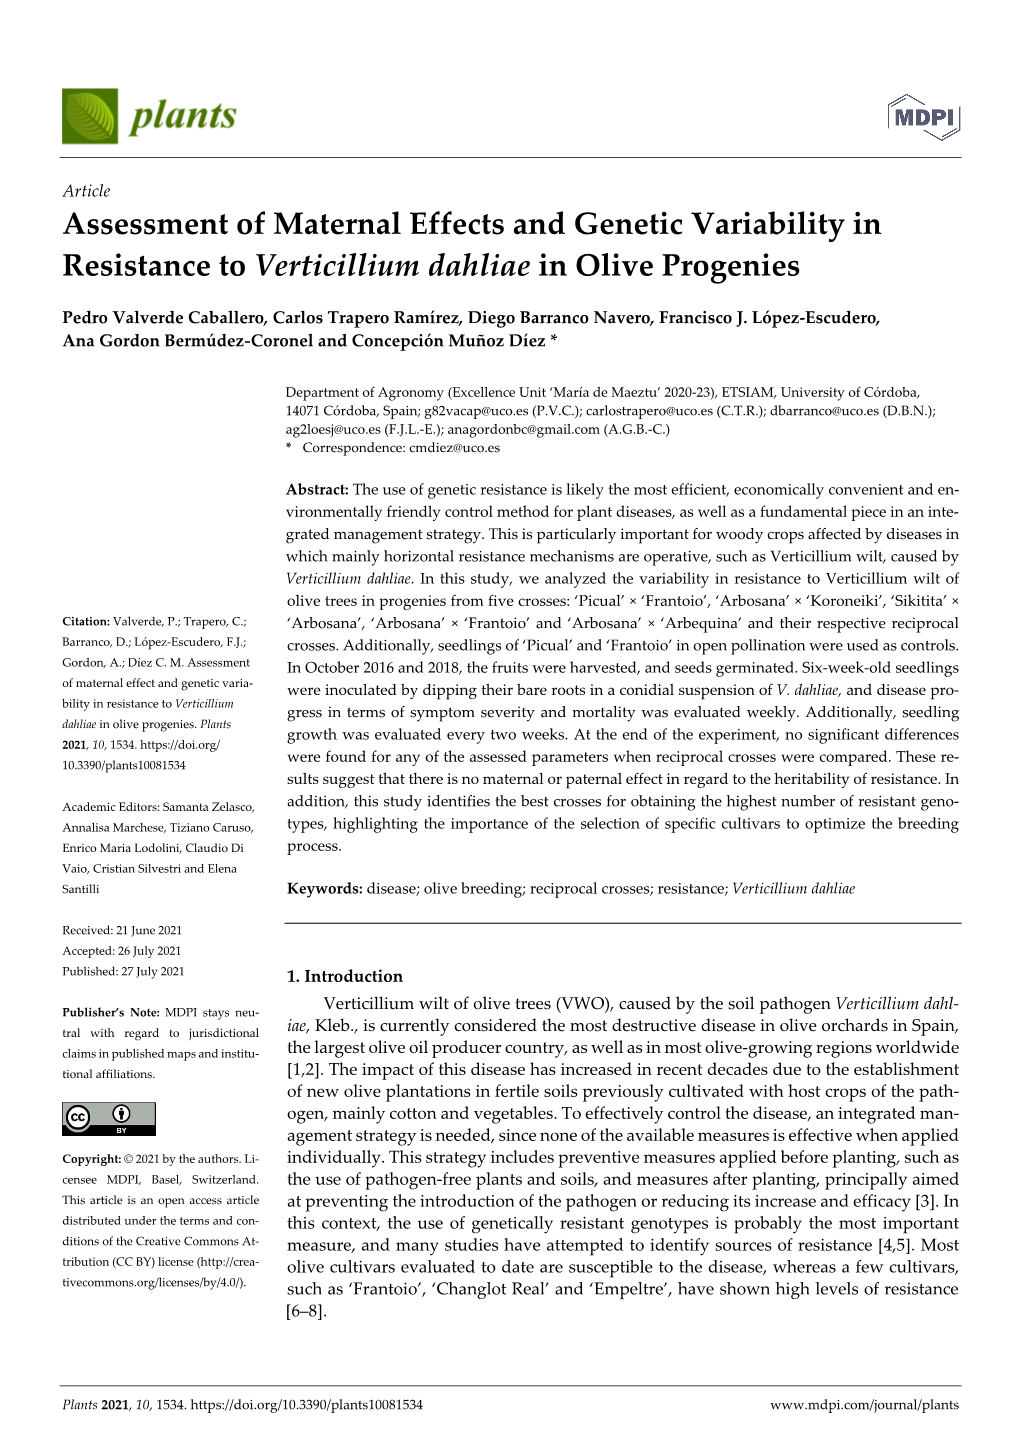 Assessment of Maternal Effects and Genetic Variability in Resistance to Verticillium Dahliae in Olive Progenies